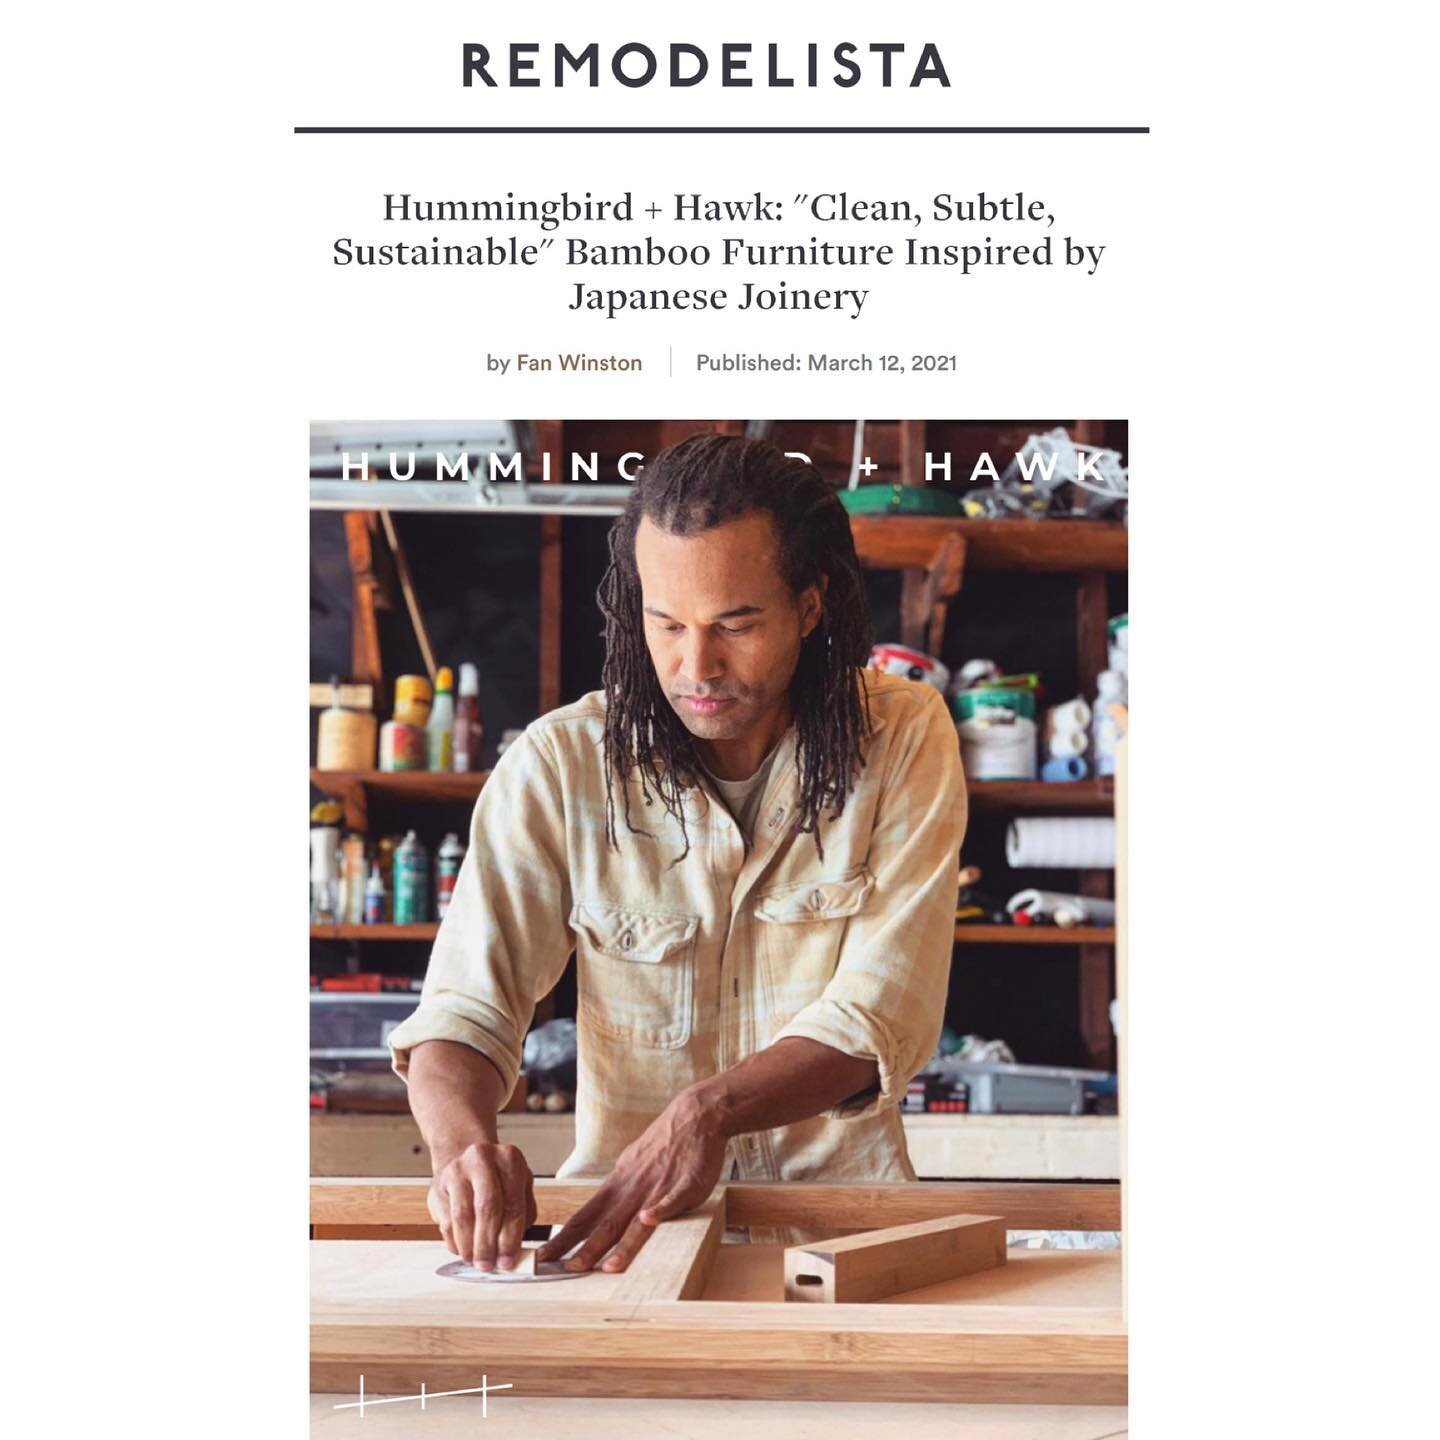 Thank you @remodelista for the beautiful article! Loved sharing our process and philosophy with you. ⁠⠀
⁠⠀
Check out the article link in our bio. ⁠⠀
⁠⠀
Words by @fanwinston⁠⠀
Photos by @meganlukeedwards⁠⠀
⁠⠀
&mdash;⁠⠀
H⁠⠀
+⁠⠀
H⁠⠀
&mdash;⁠⠀
#furniture